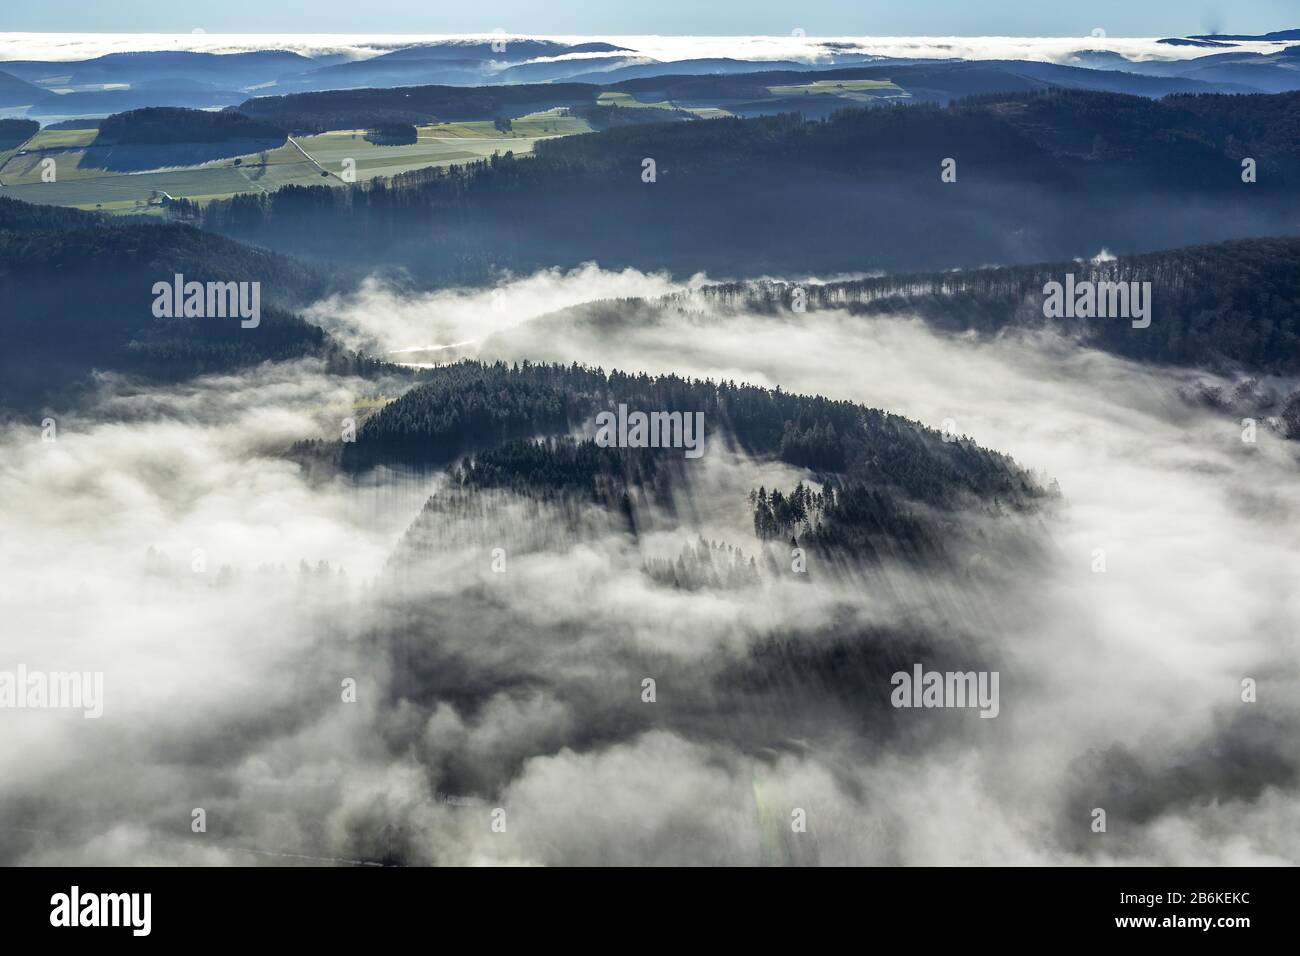 Fog landscape over mountains and forests at Marsberg, aerial view, 11.12.2013, Germany, North Rhine-Westphalia, Sauerland, Marsberg Stock Photo